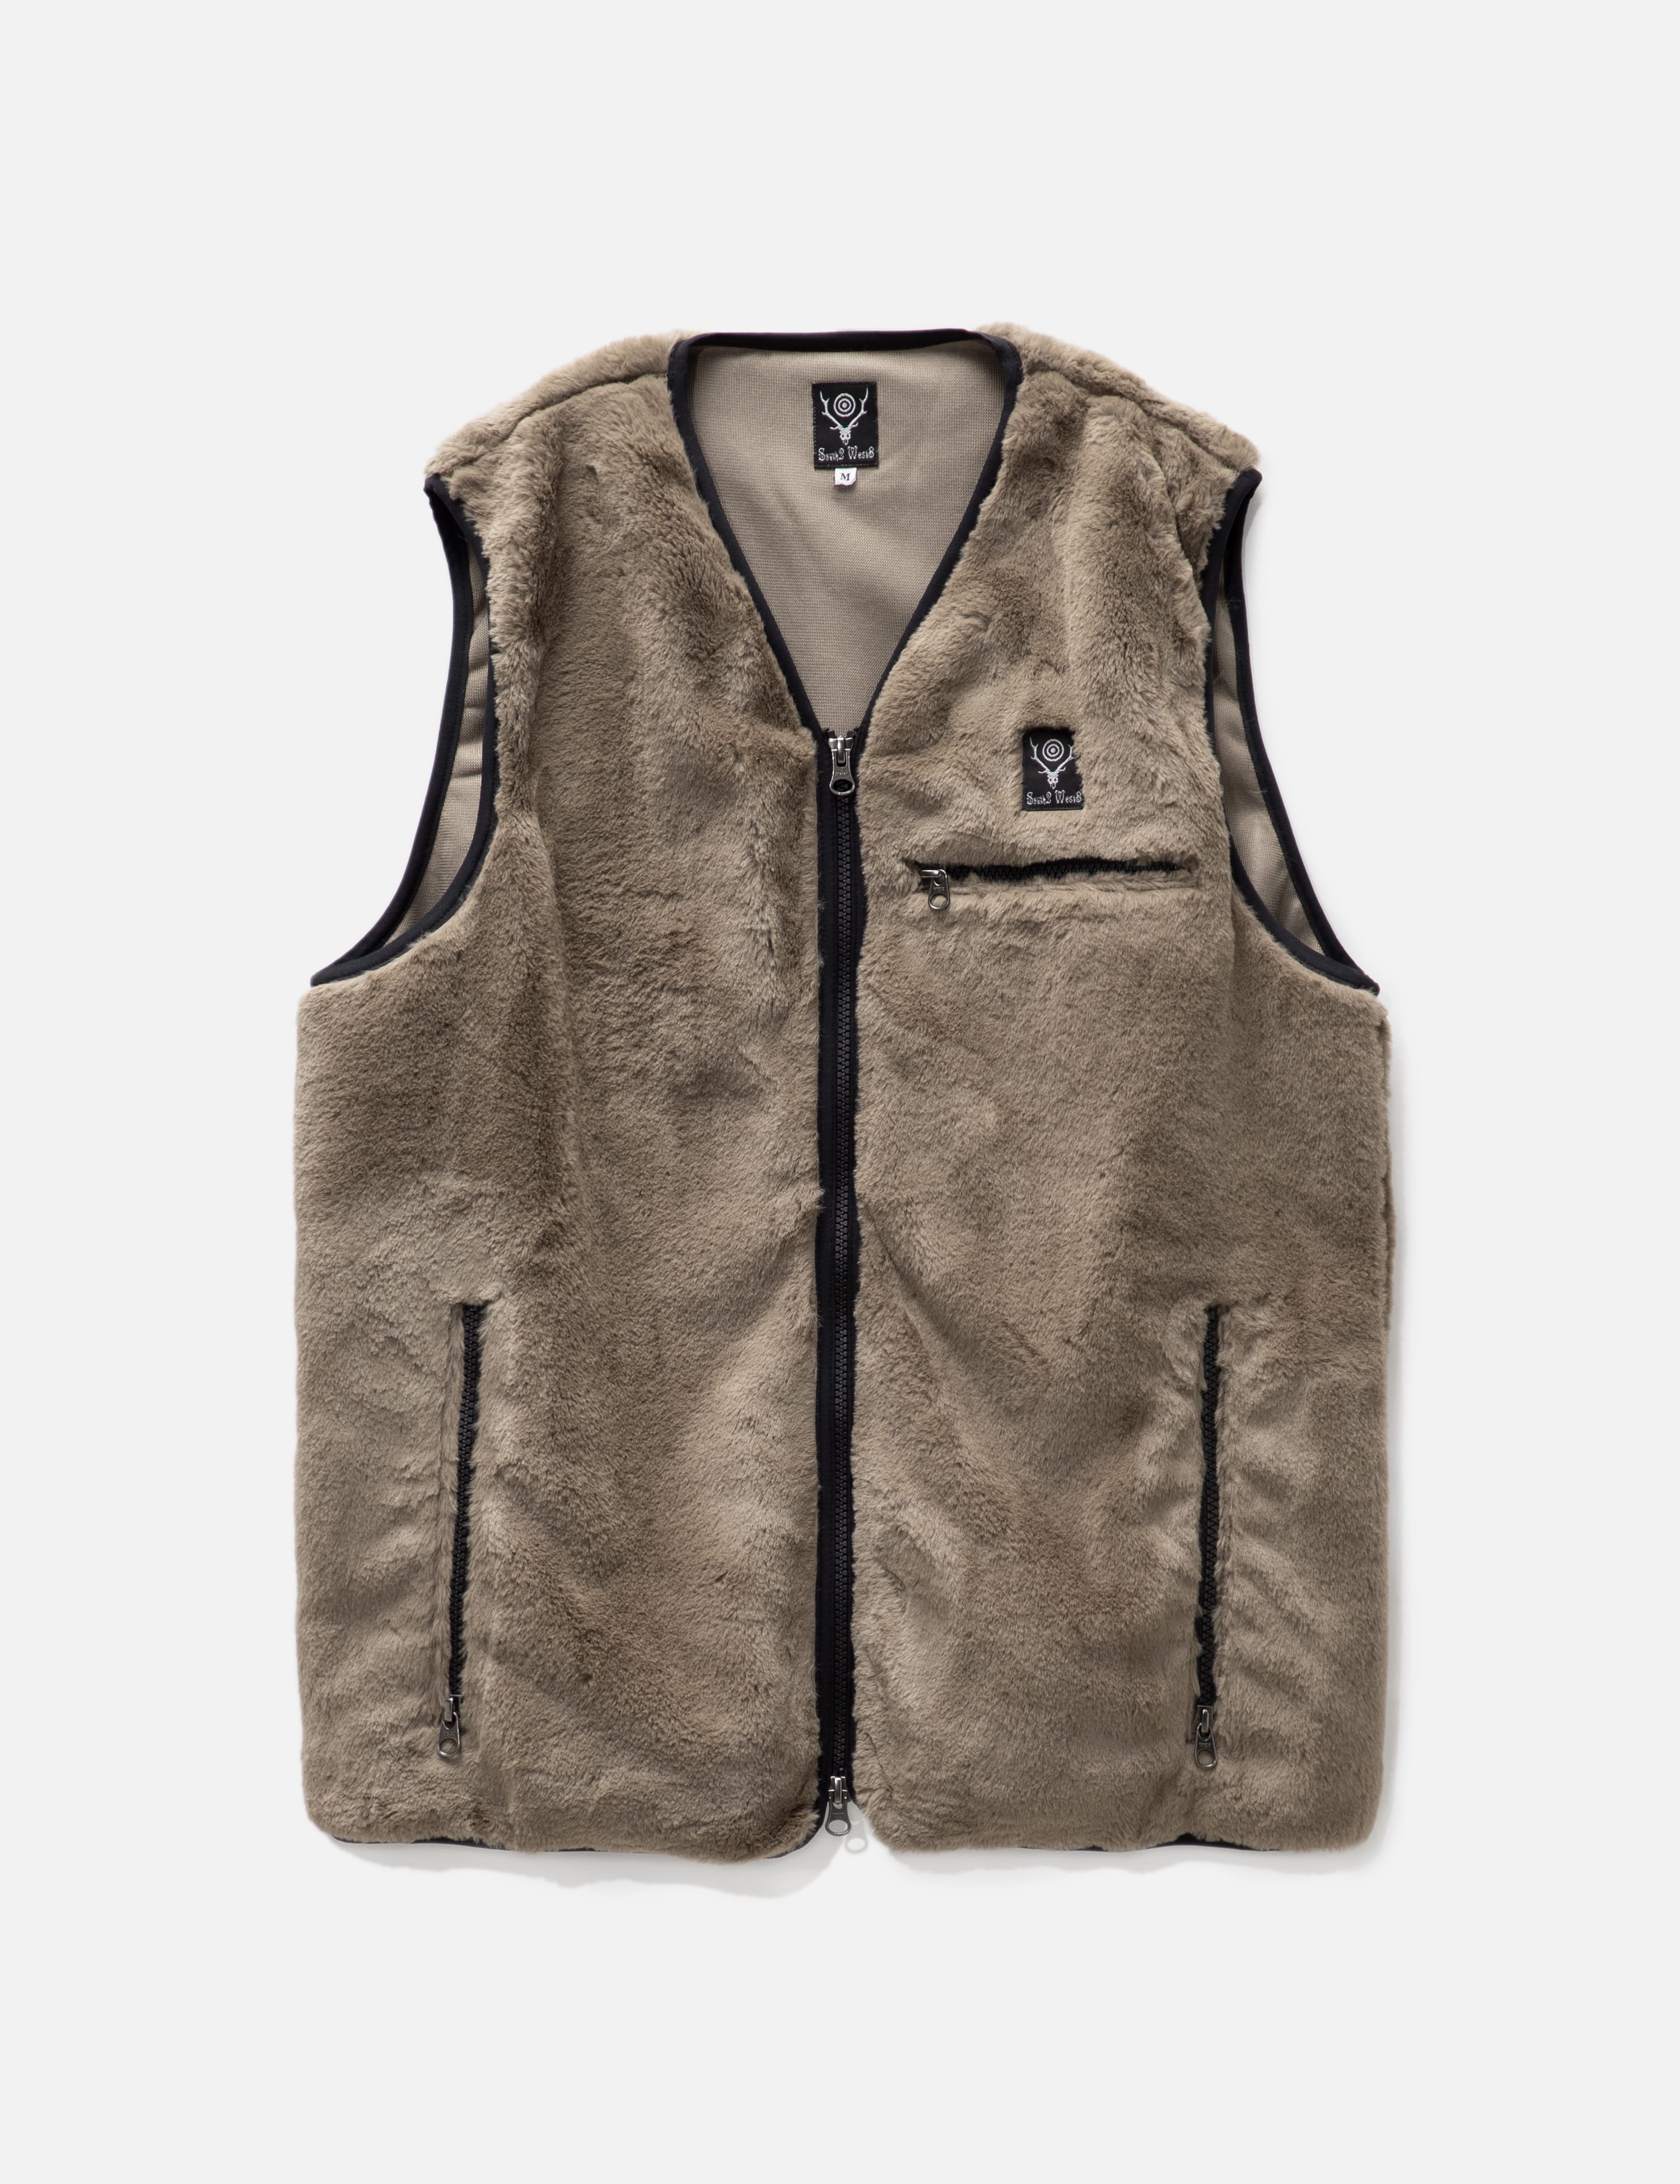 WILD THINGS - MONSTER VEST | HBX - Globally Curated Fashion 